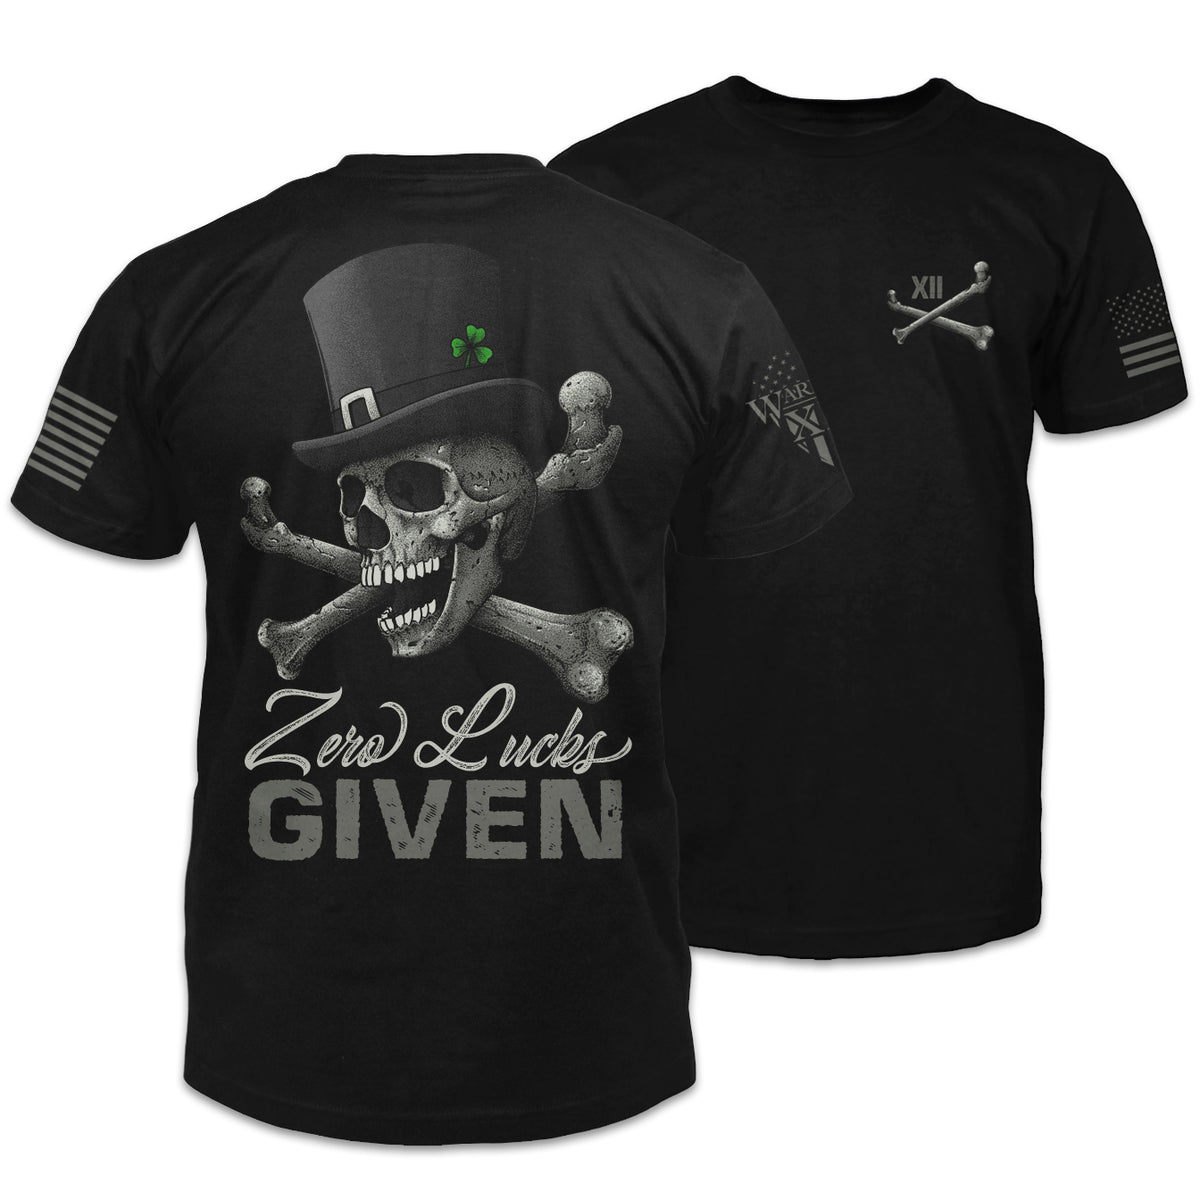 The front and back of a black t-shirt. On the back is an an image of a skull and crossbones with a tophat and shamrock in the hat; the owrds "zero lucks given" are below the image. The front of the shirt has a pocket image of crossbones with an XII.